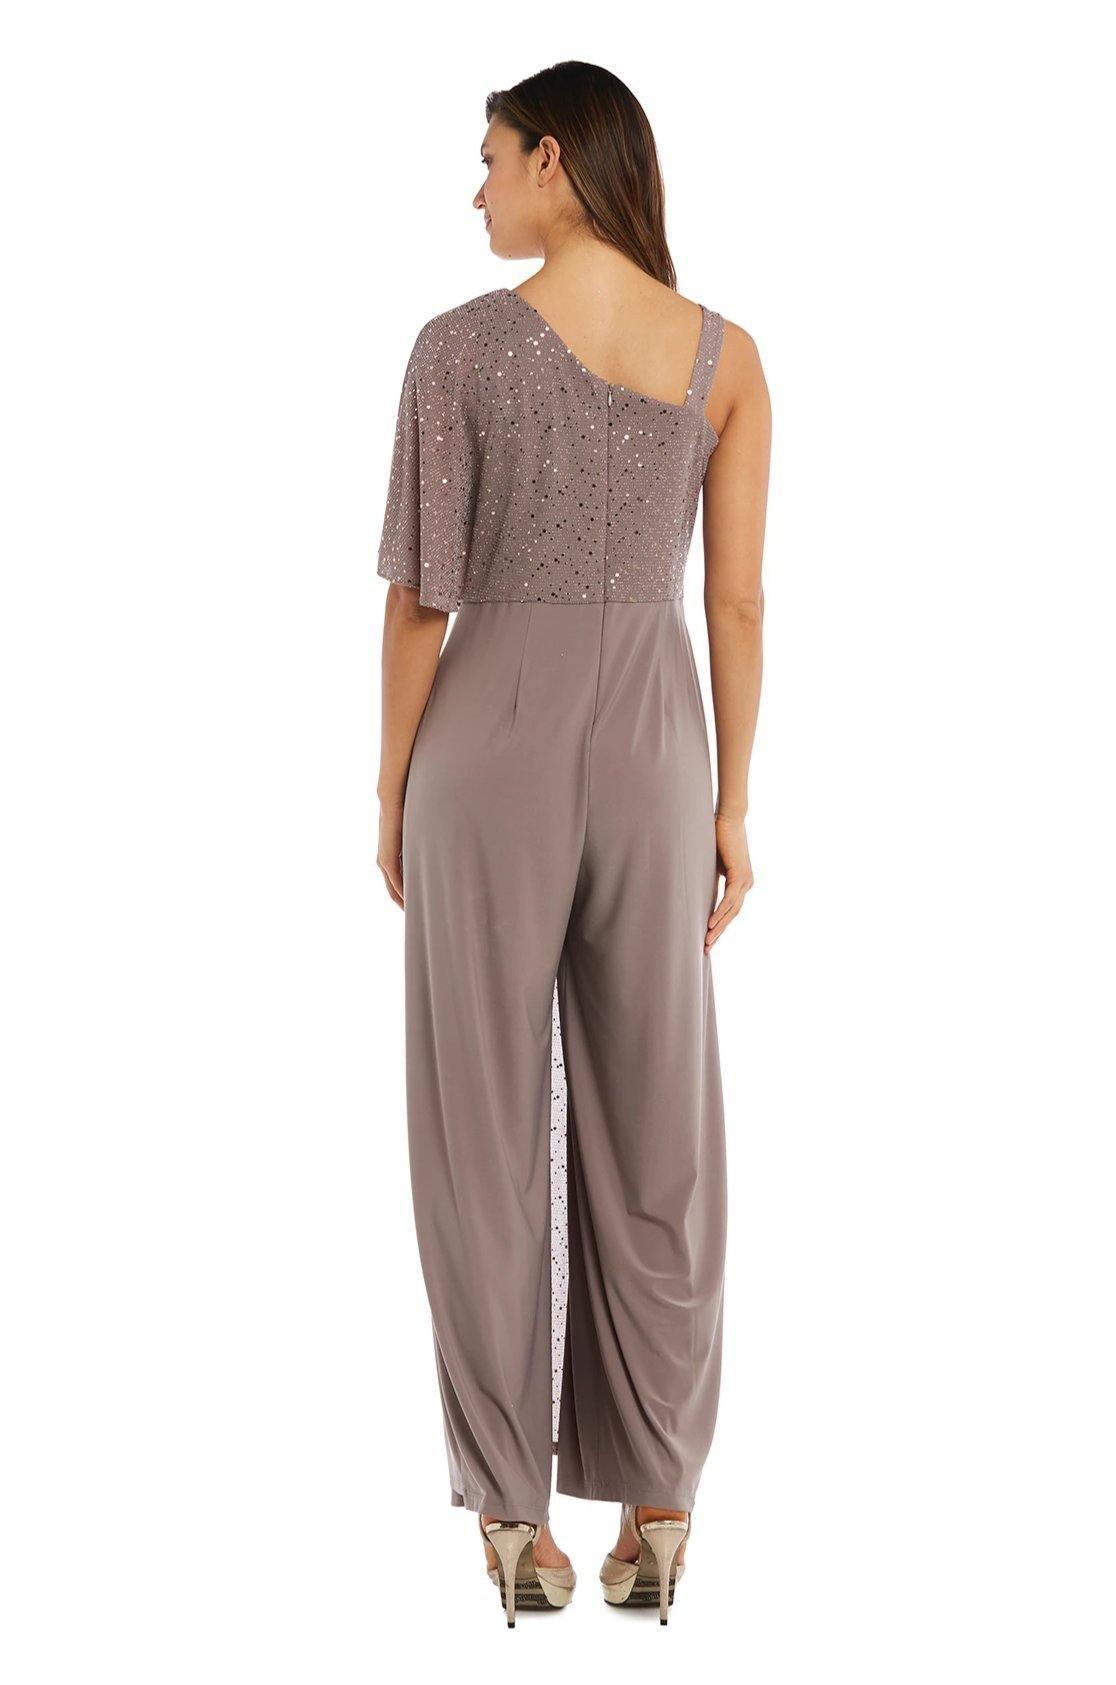 Asymmetric Jumpsuit with Sequined Overlay Sale - The Dress Outlet